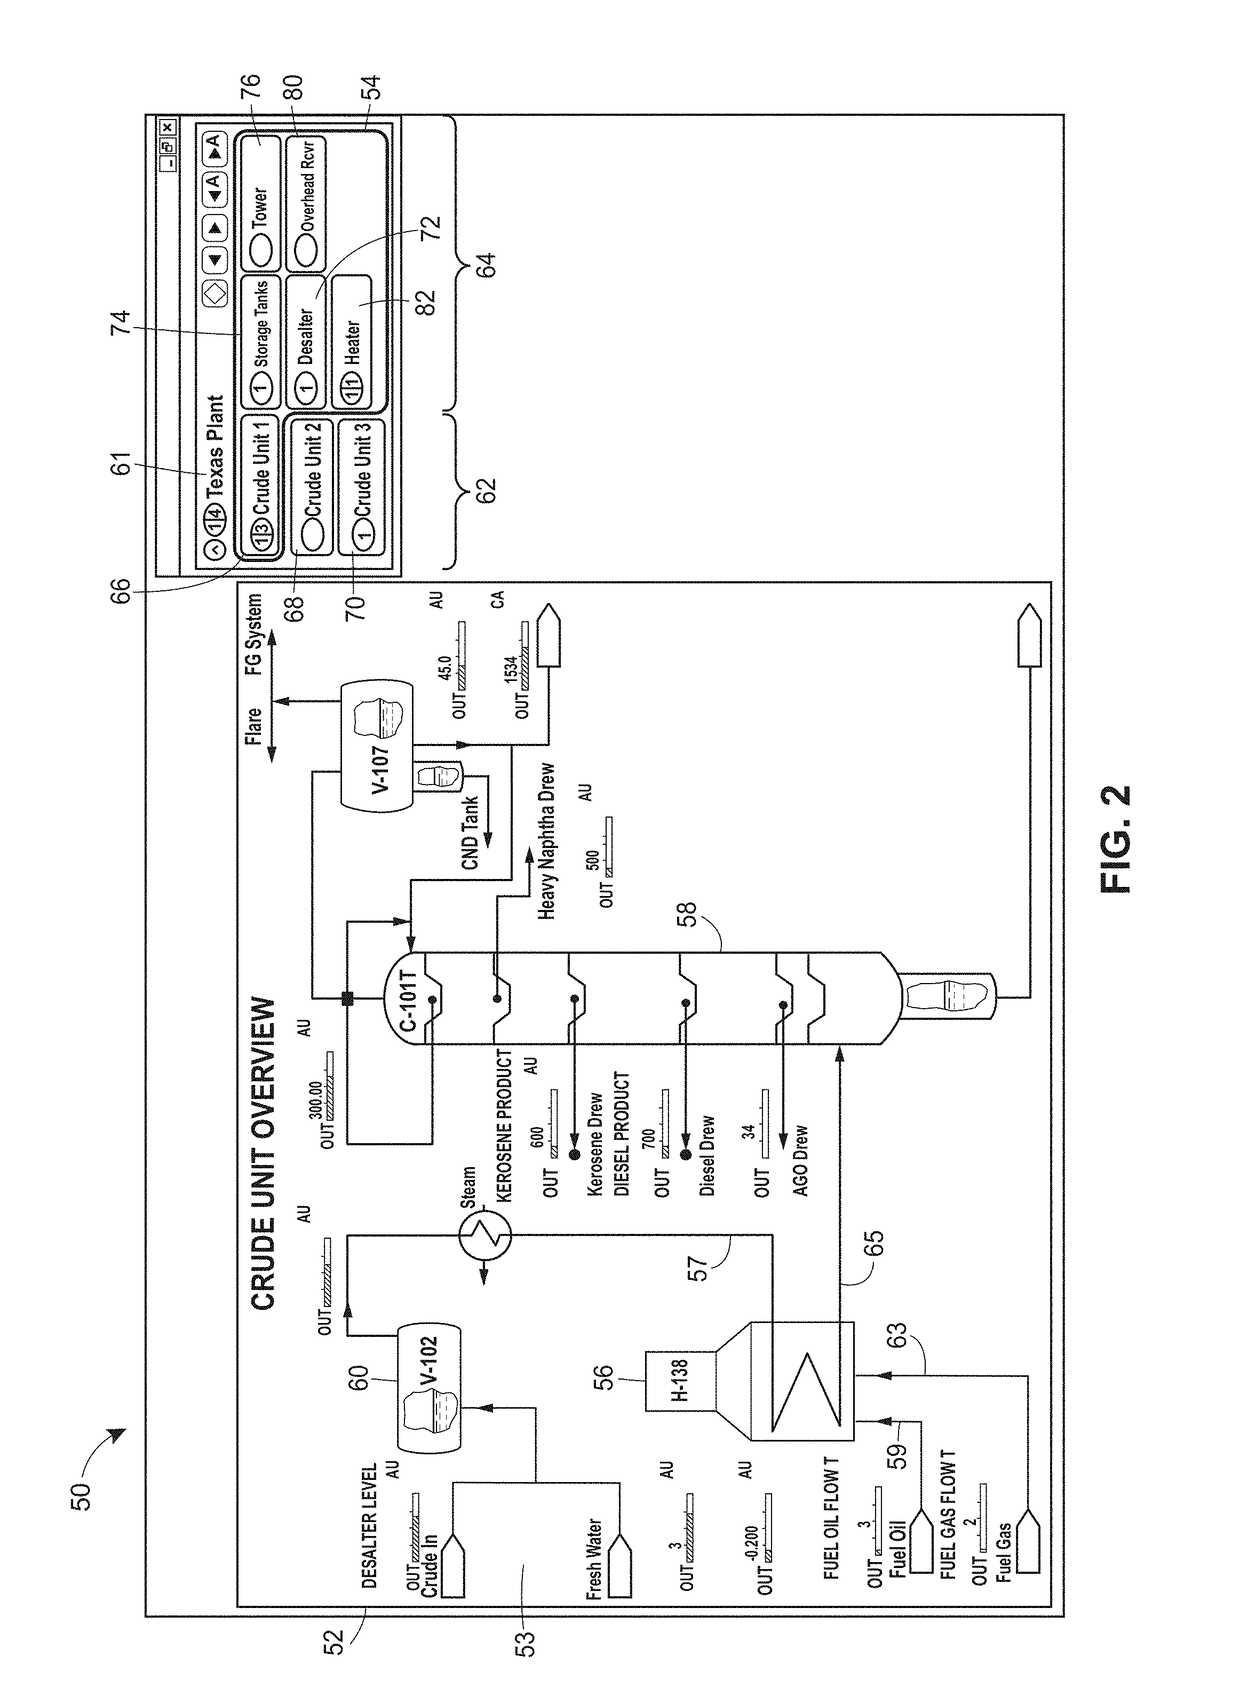 Graphical process variable trend monitoring with zoom features for use in a process control system